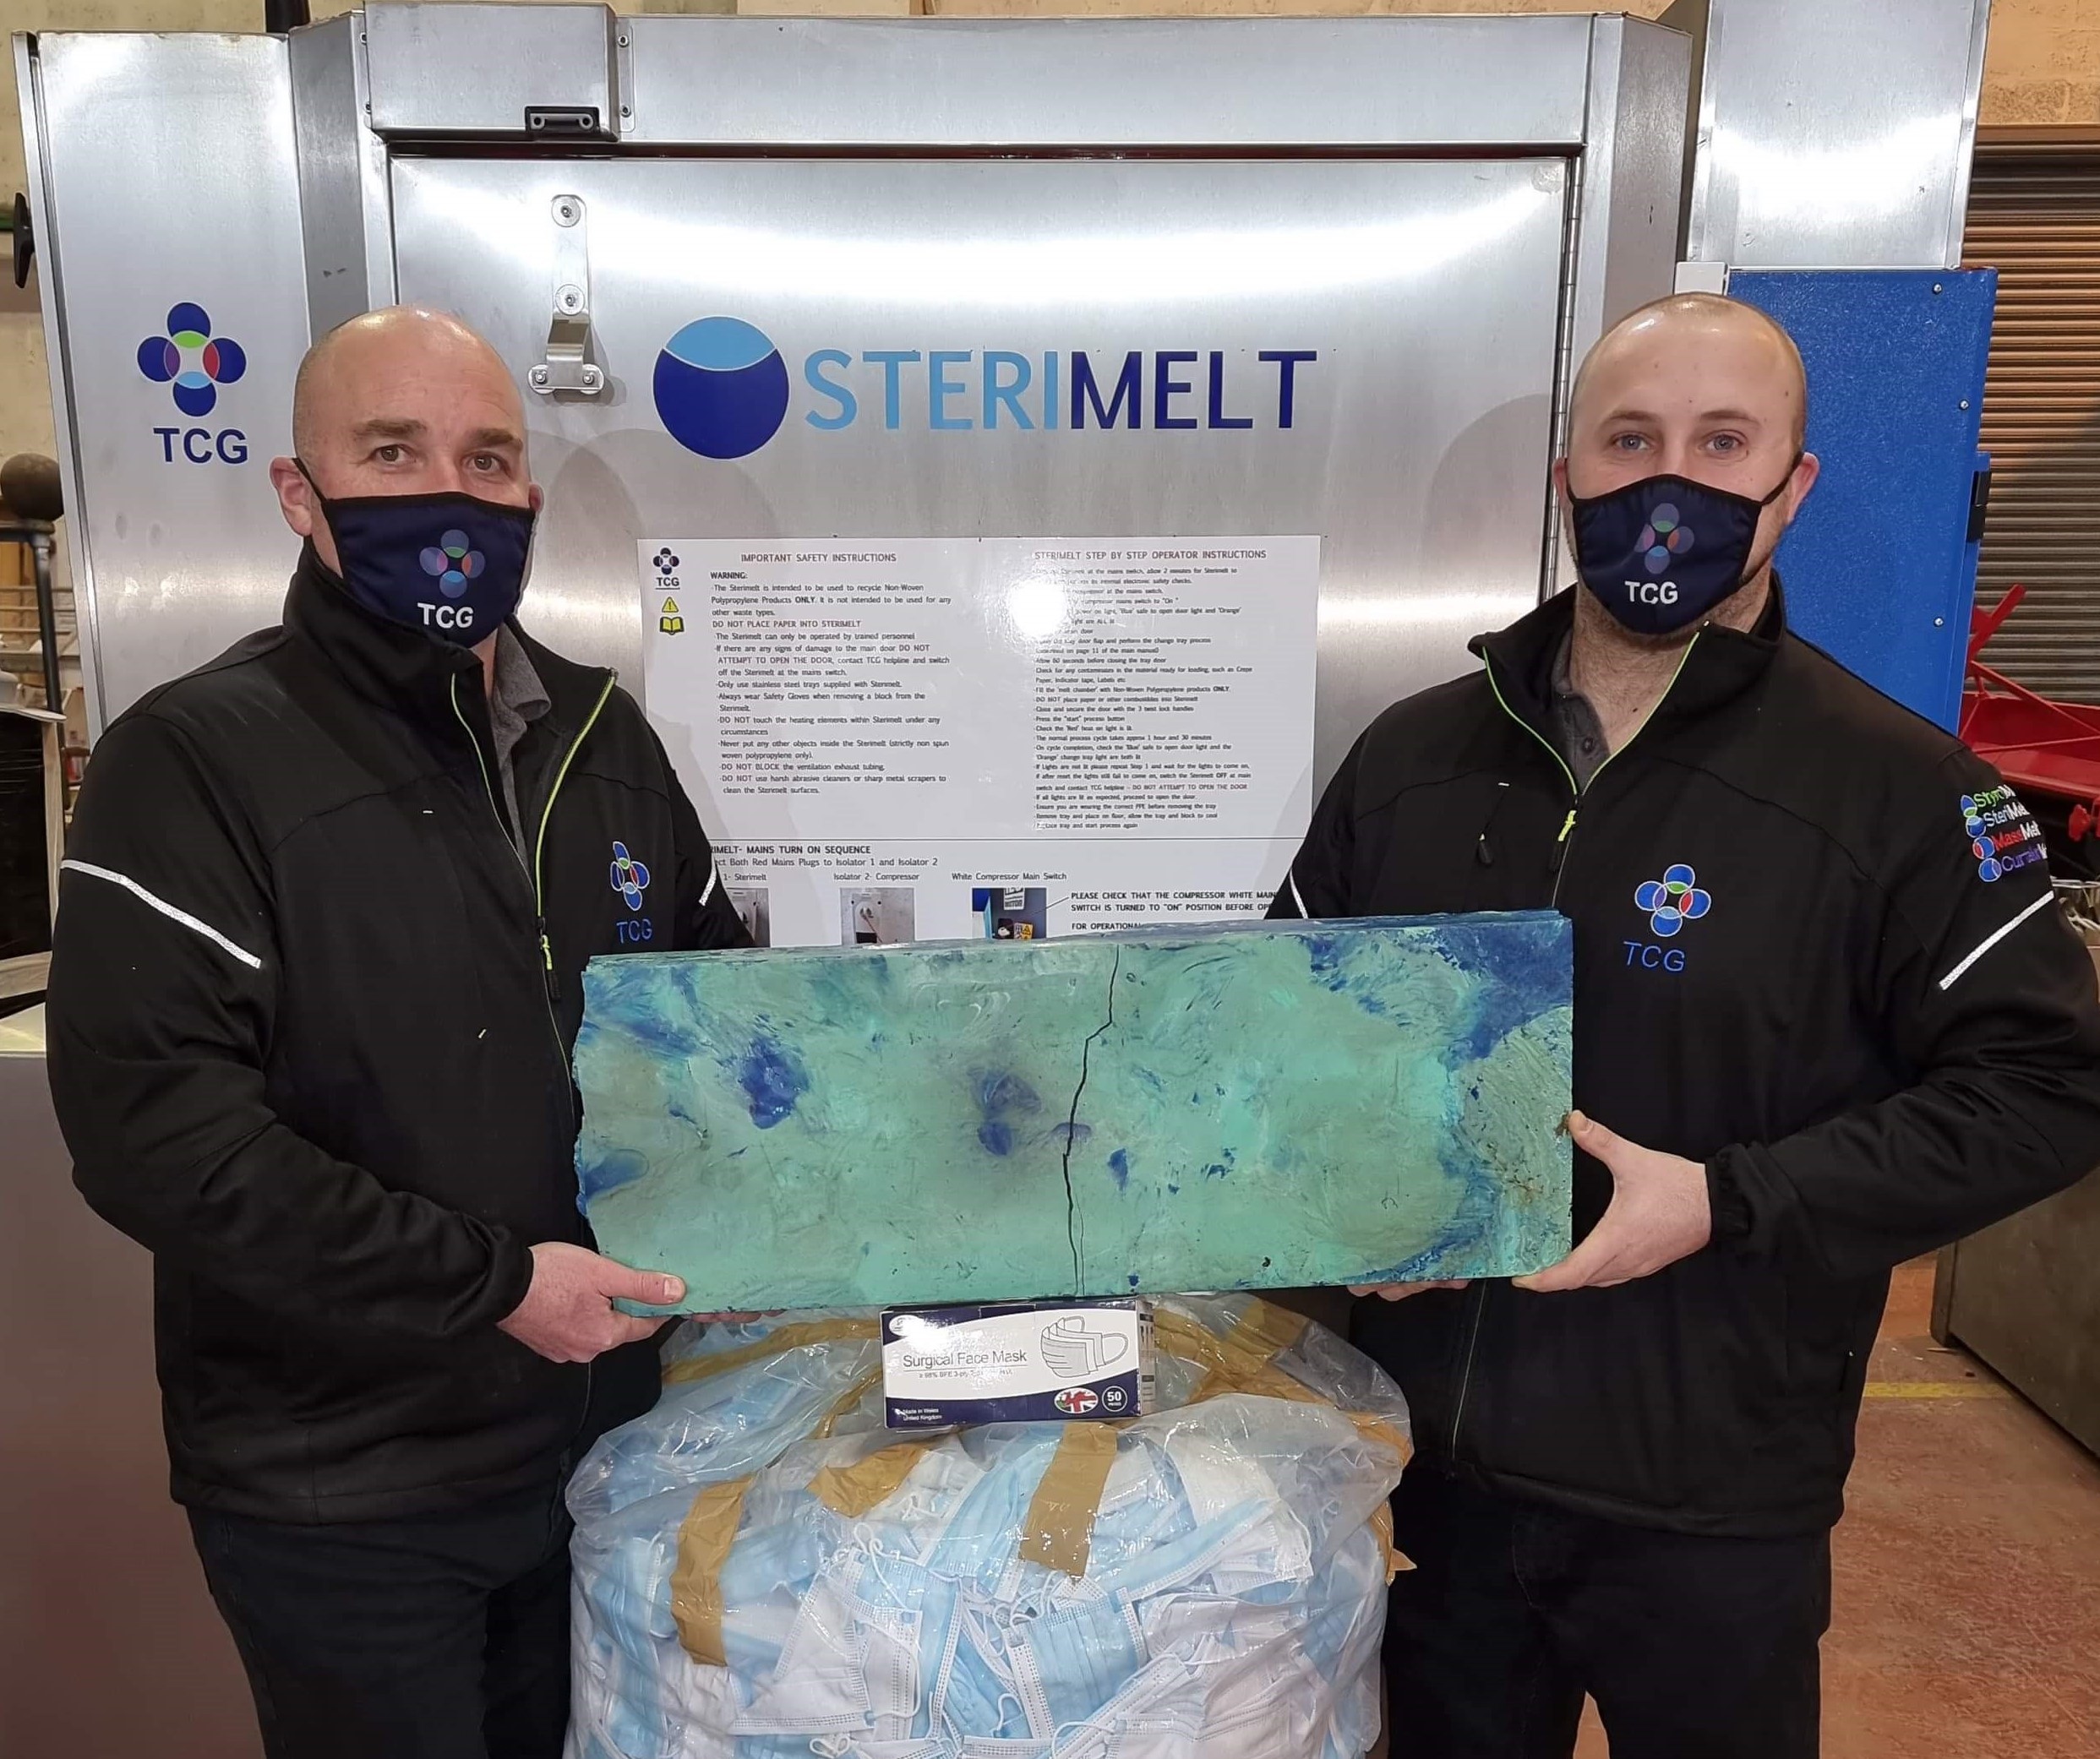 For illustrative purposes only. Bag shown approx 20KGS, Block shown is 20KGS.equal to approx 6,666 Hardshell masks.TCG(L-R) Mathew Rapson Thomas Davison-Serby